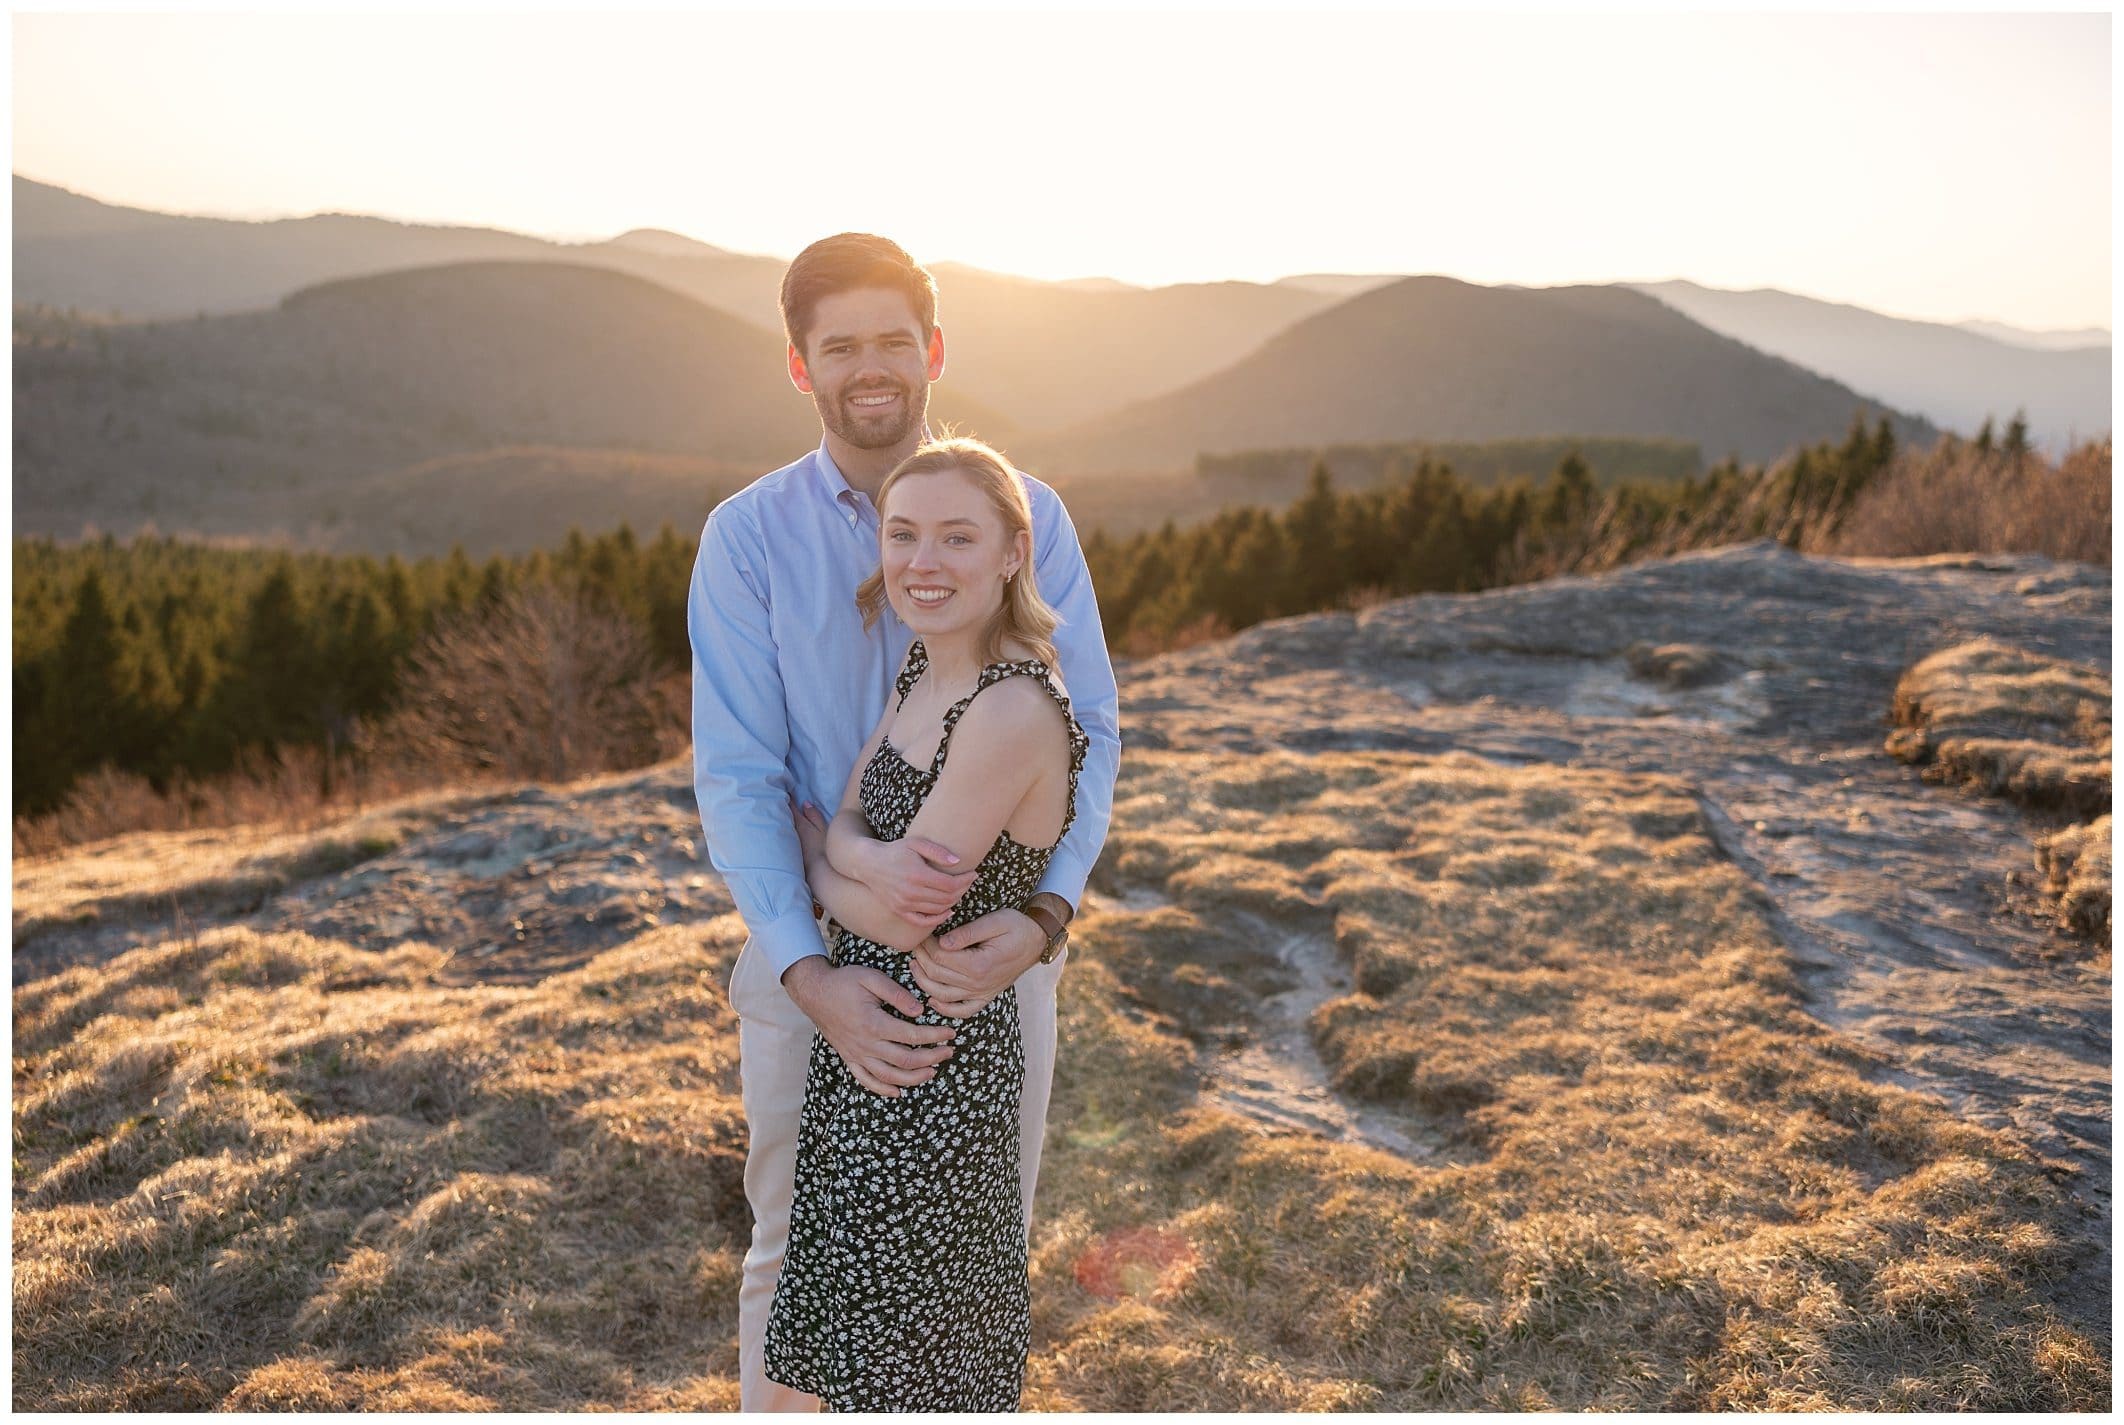 Engagement photo of couple with mountain views